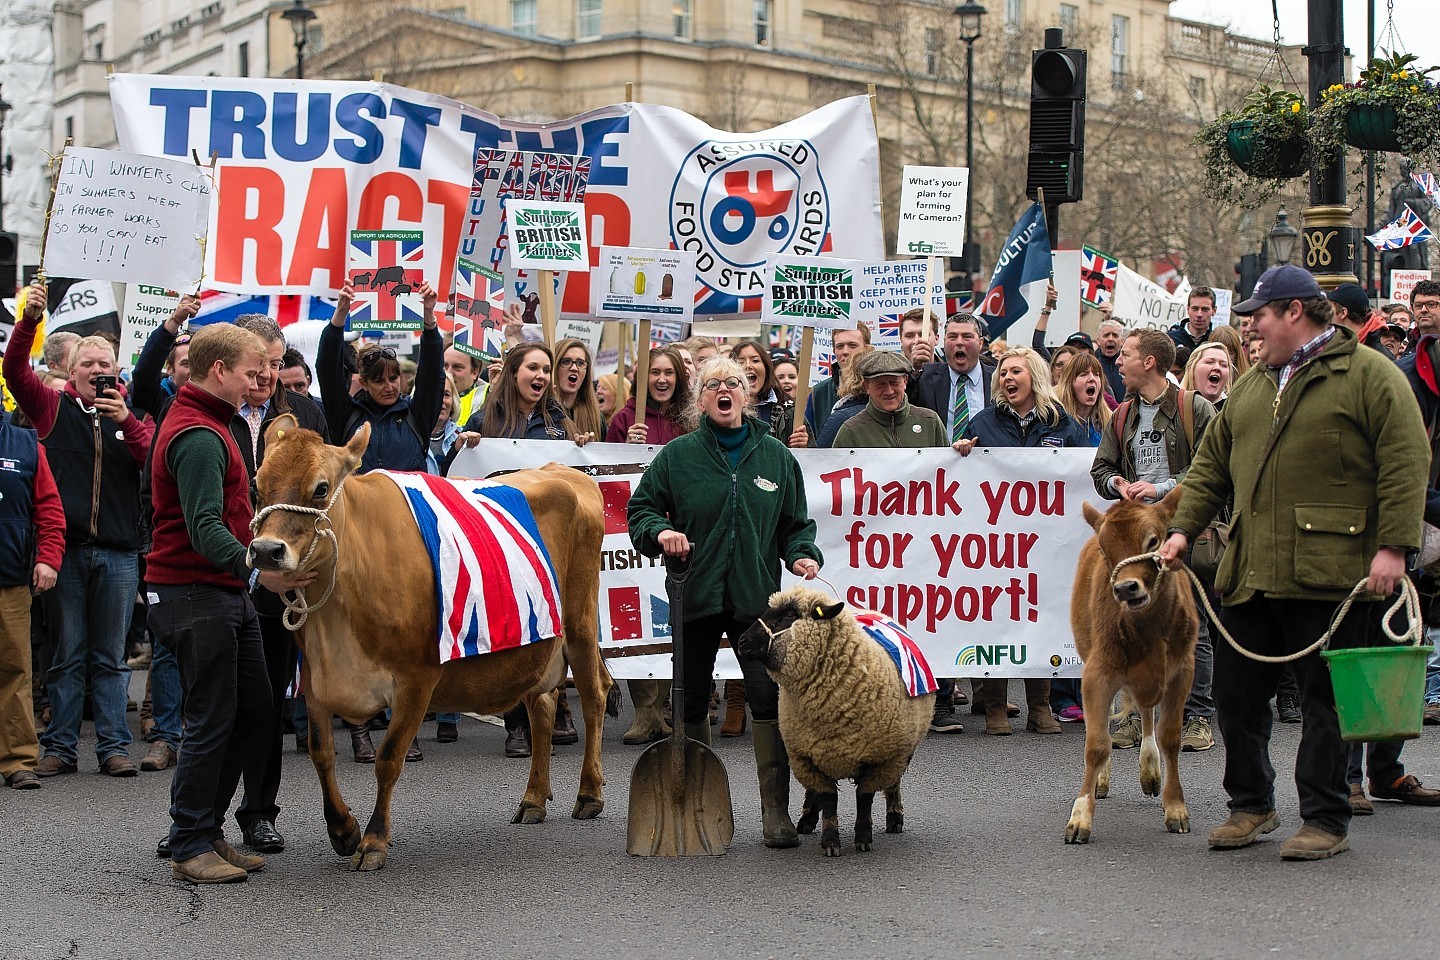 More than 1,000 farmers attended a march in London